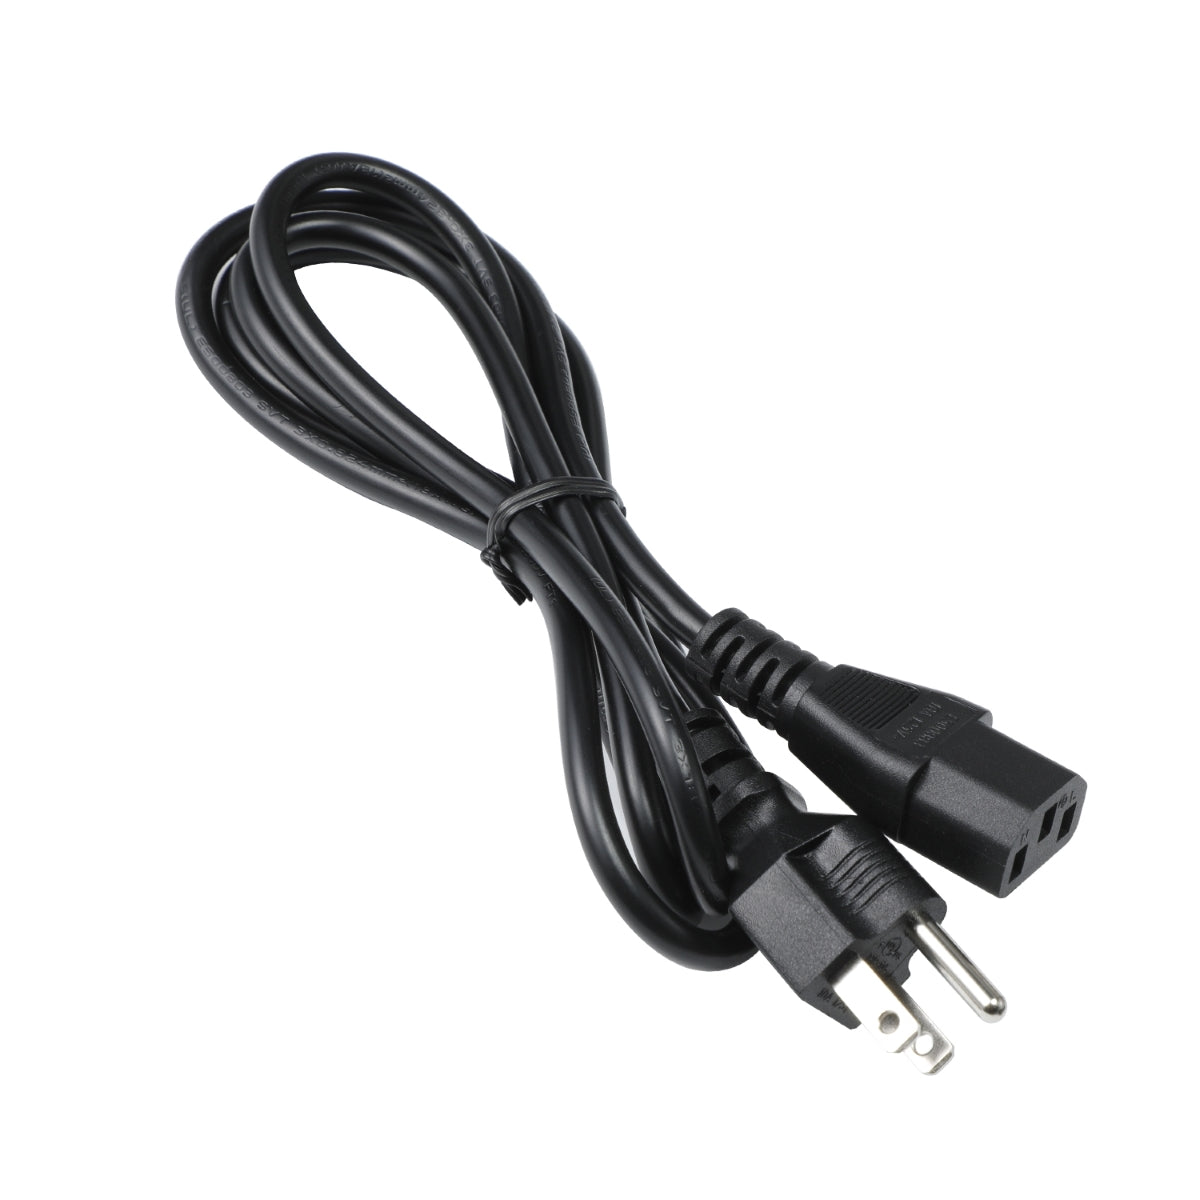 Power Cord for Samsung LS32A804NMNXGO Monitor TV.